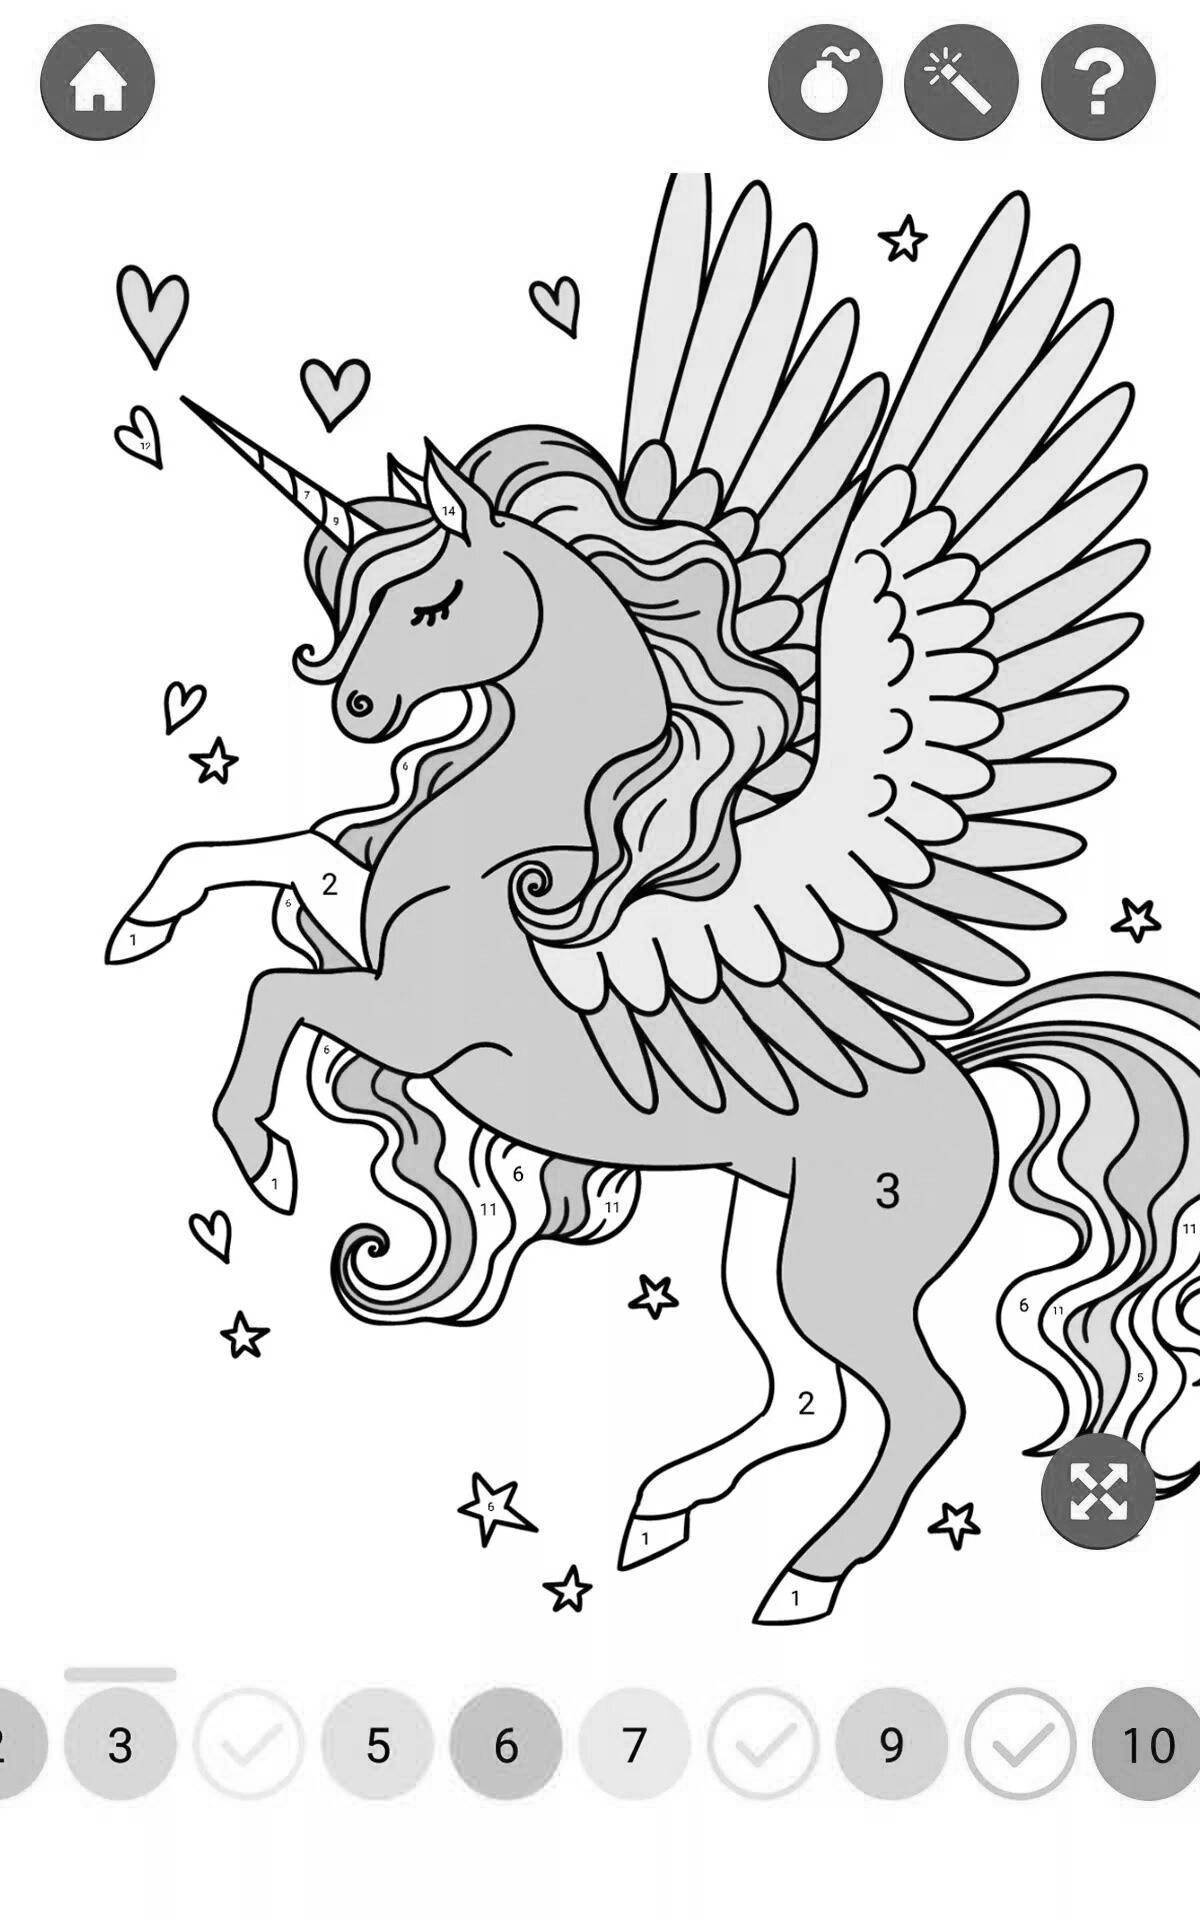 Fabulous unicorn coloring by numbers